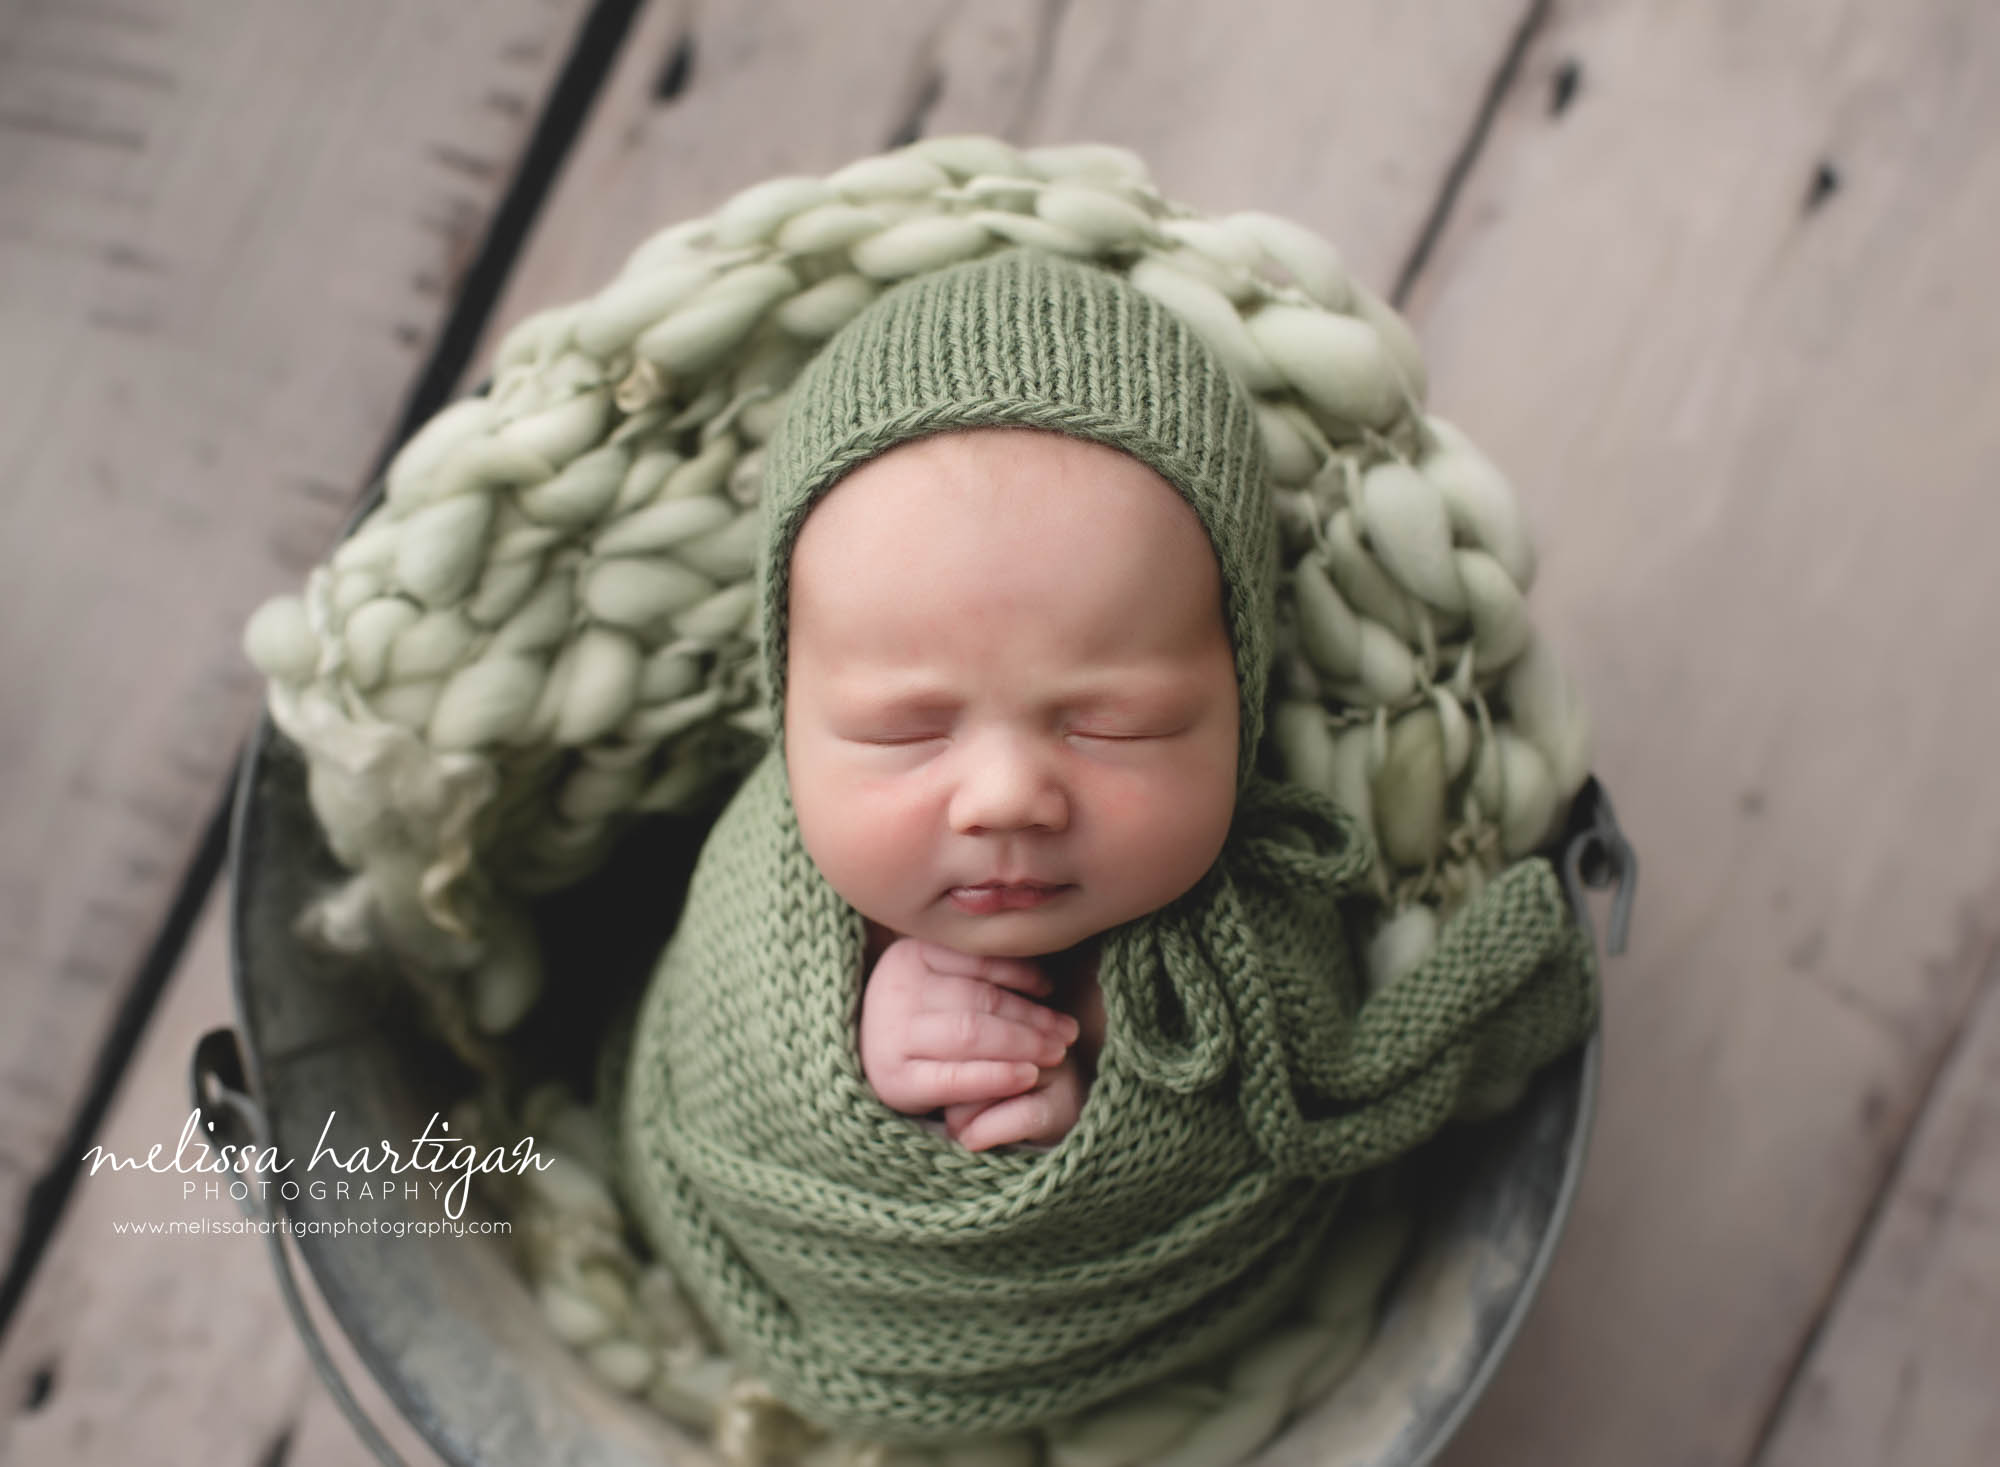 Baby girl pose din metal bucket with sgae green knitted layer wrap and matching bonnet CT baby photographer stafford